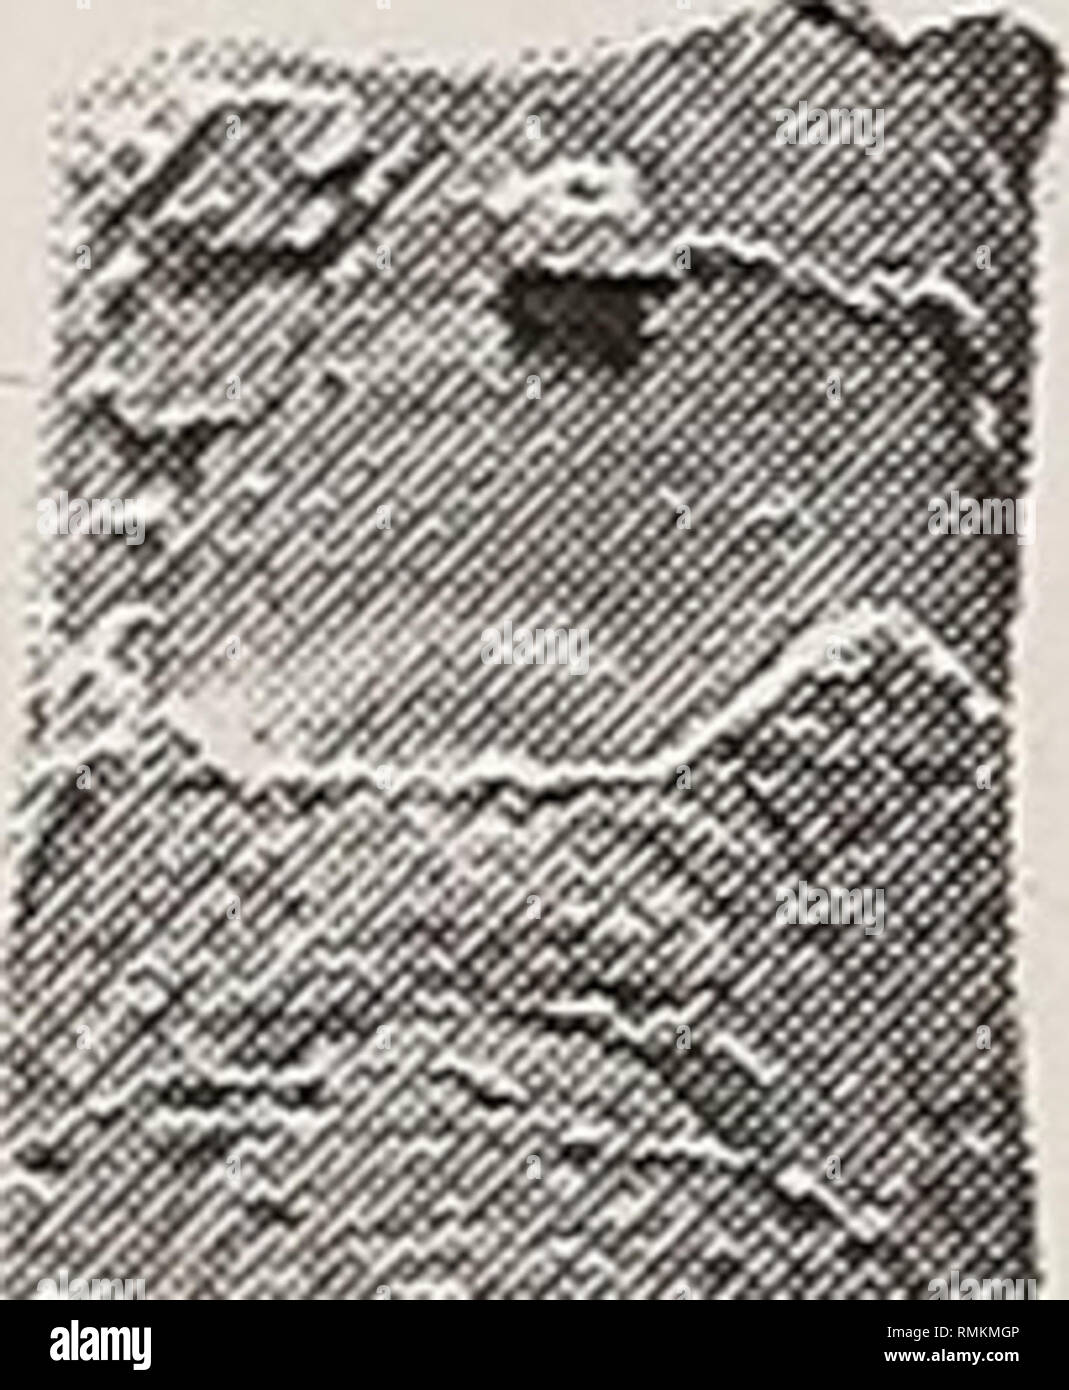 . Annals of the South African Museum = Annale van die Suid-Afrikaanse Museum. Natural history. 100 ANNALS OF THE SOUTH AFRICAN MUSEUM. B Fig. 76. Baculites codyensis Reeside, 1927a. From Marias J*iver Shale, Santonian, USGS Mesozoic locality 21425, east bank of Marias River, 18.15 km (11 miles) south-west of Shelby in WV* NEK SE14 sec. 14, T. 31 N., R. 4 W., Toole County, Montana. A-C. USNM 506266, well-preserved individual with shell present, showing normal ornament and growth lines. D-F. USNM 507267, example with well-developed wrinkles affecting whole of shell surface, and also present on i Stock Photo